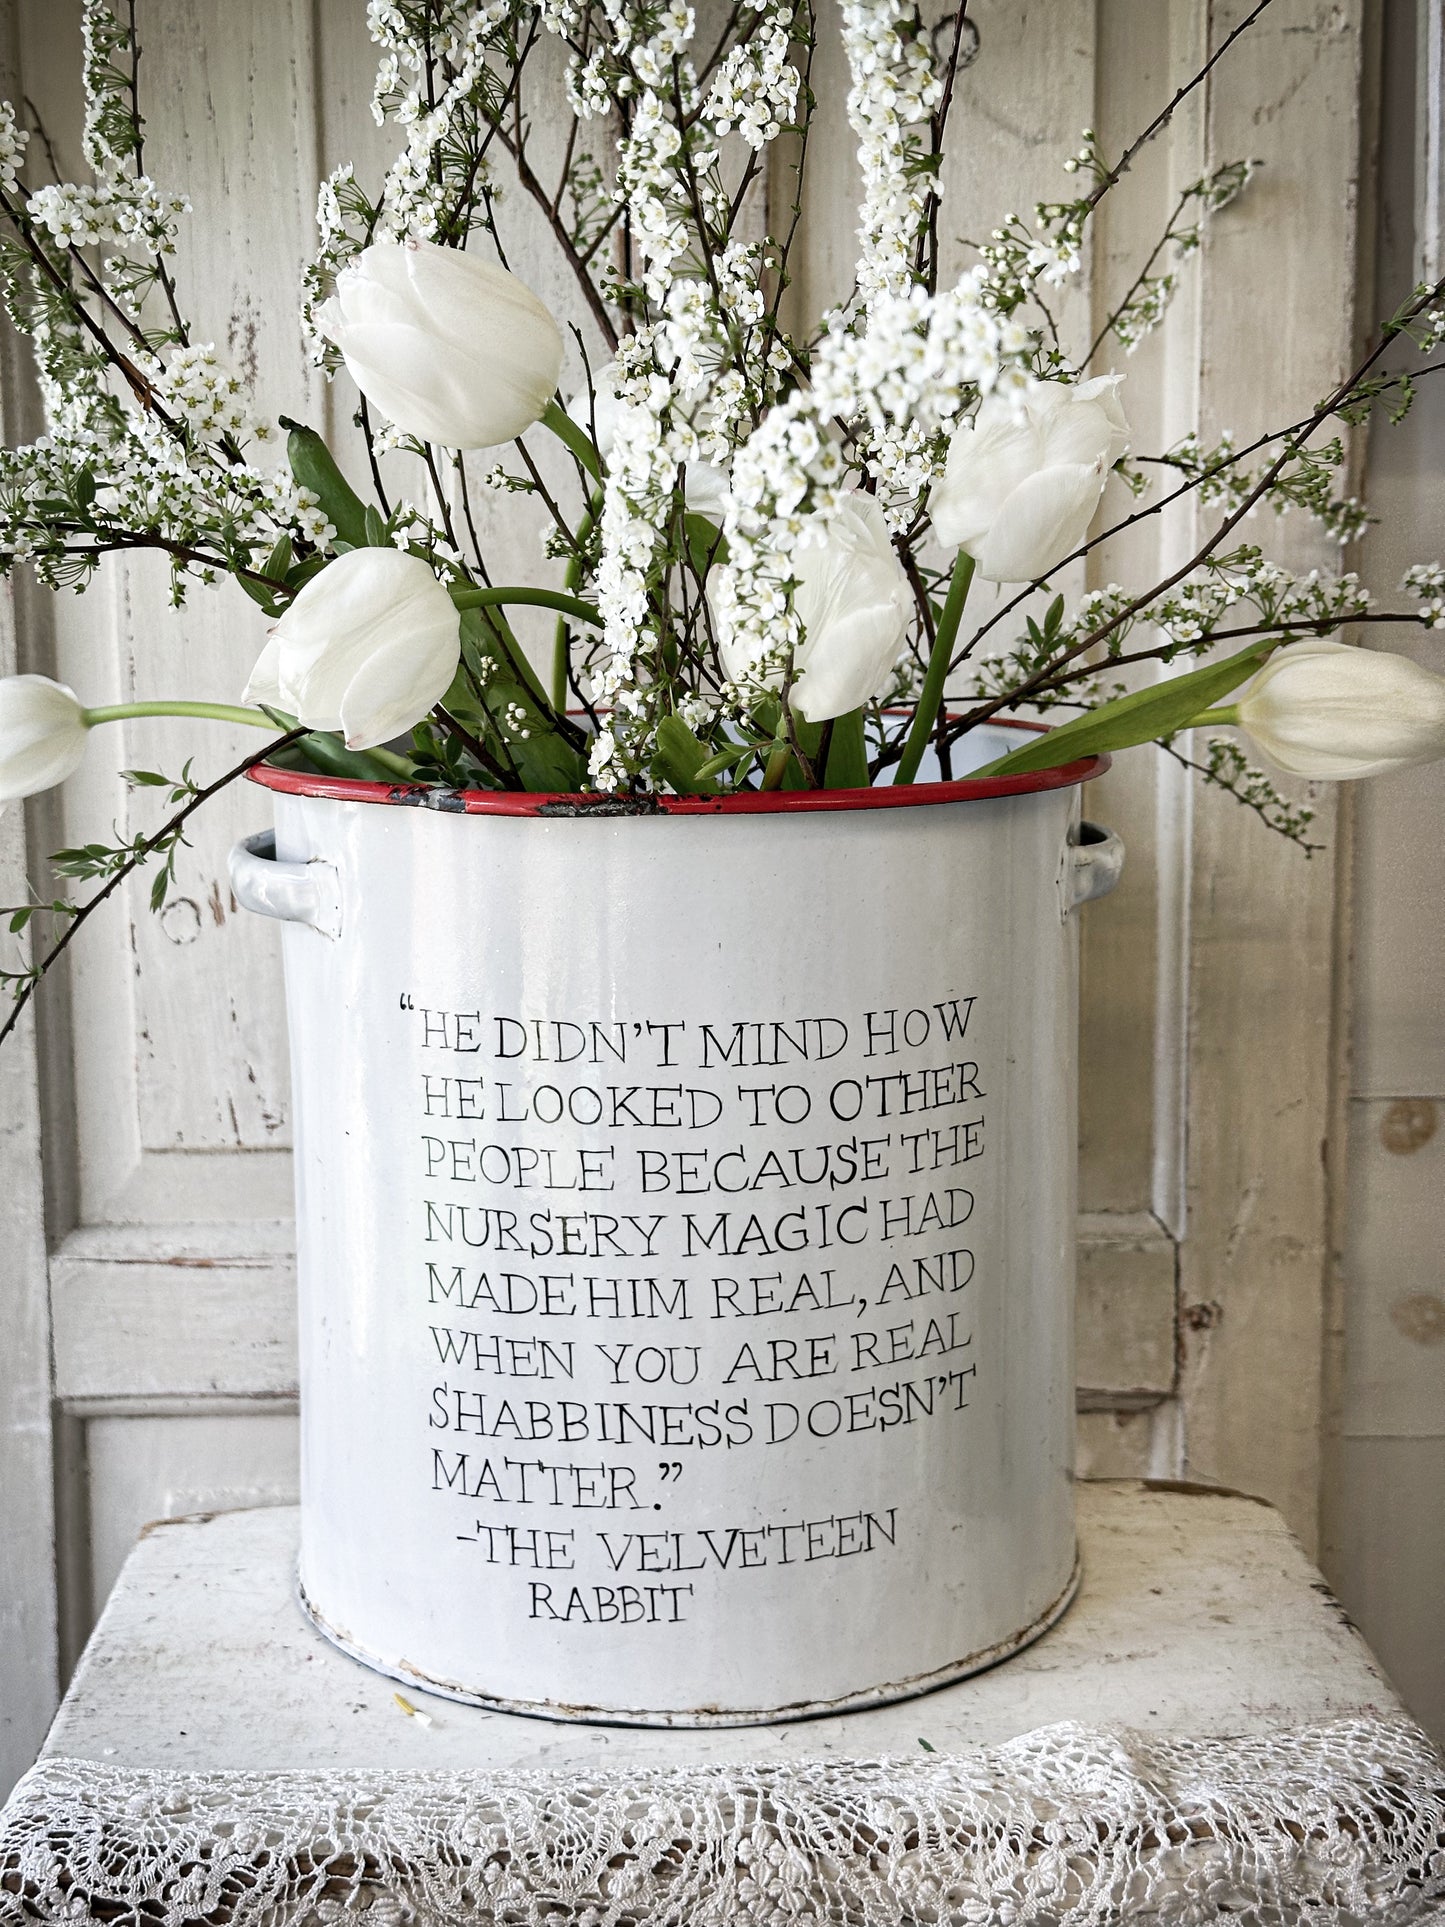 A beautiful vintage enamel canister with Velveteen Rabbit quote